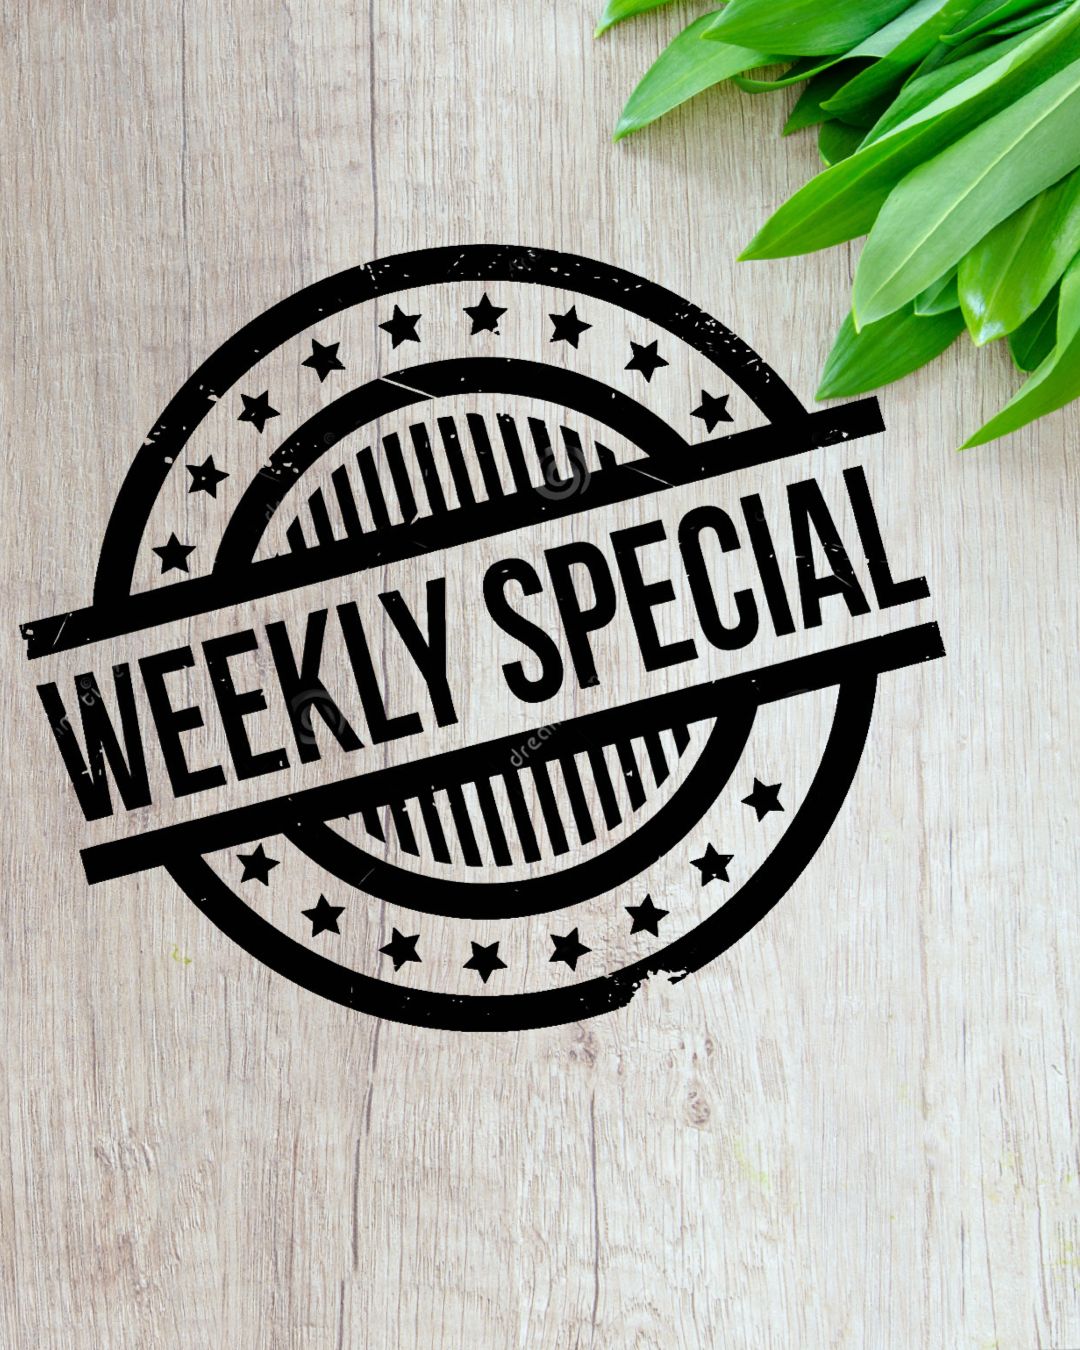 Our Weekly Special  Tuesday - Sunday 